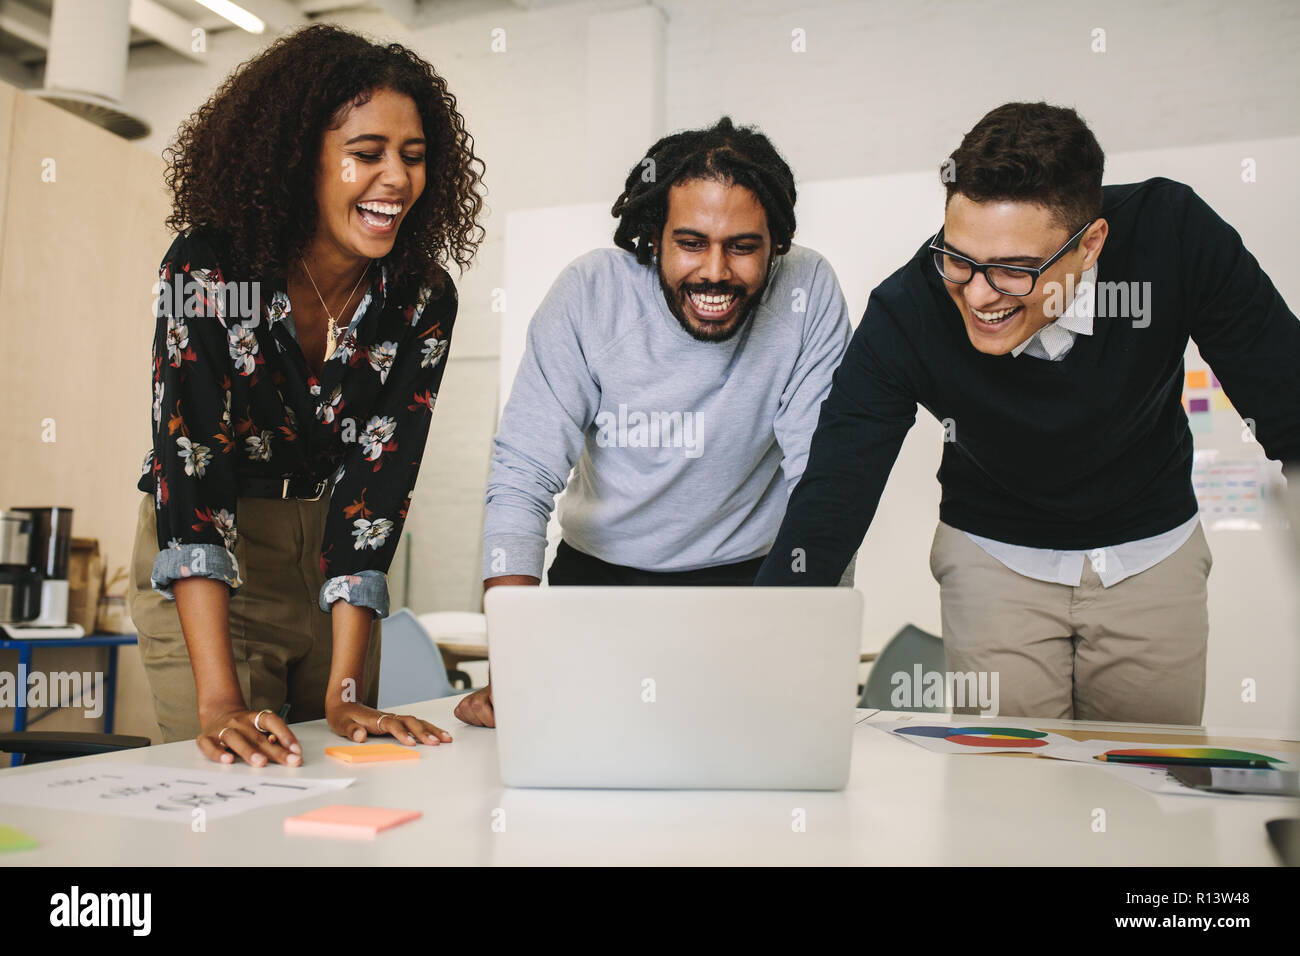 businessmen and woman having fun during work and laughing. business colleagues standing together in office looking at a laptop computer and laughing. Stock Photo